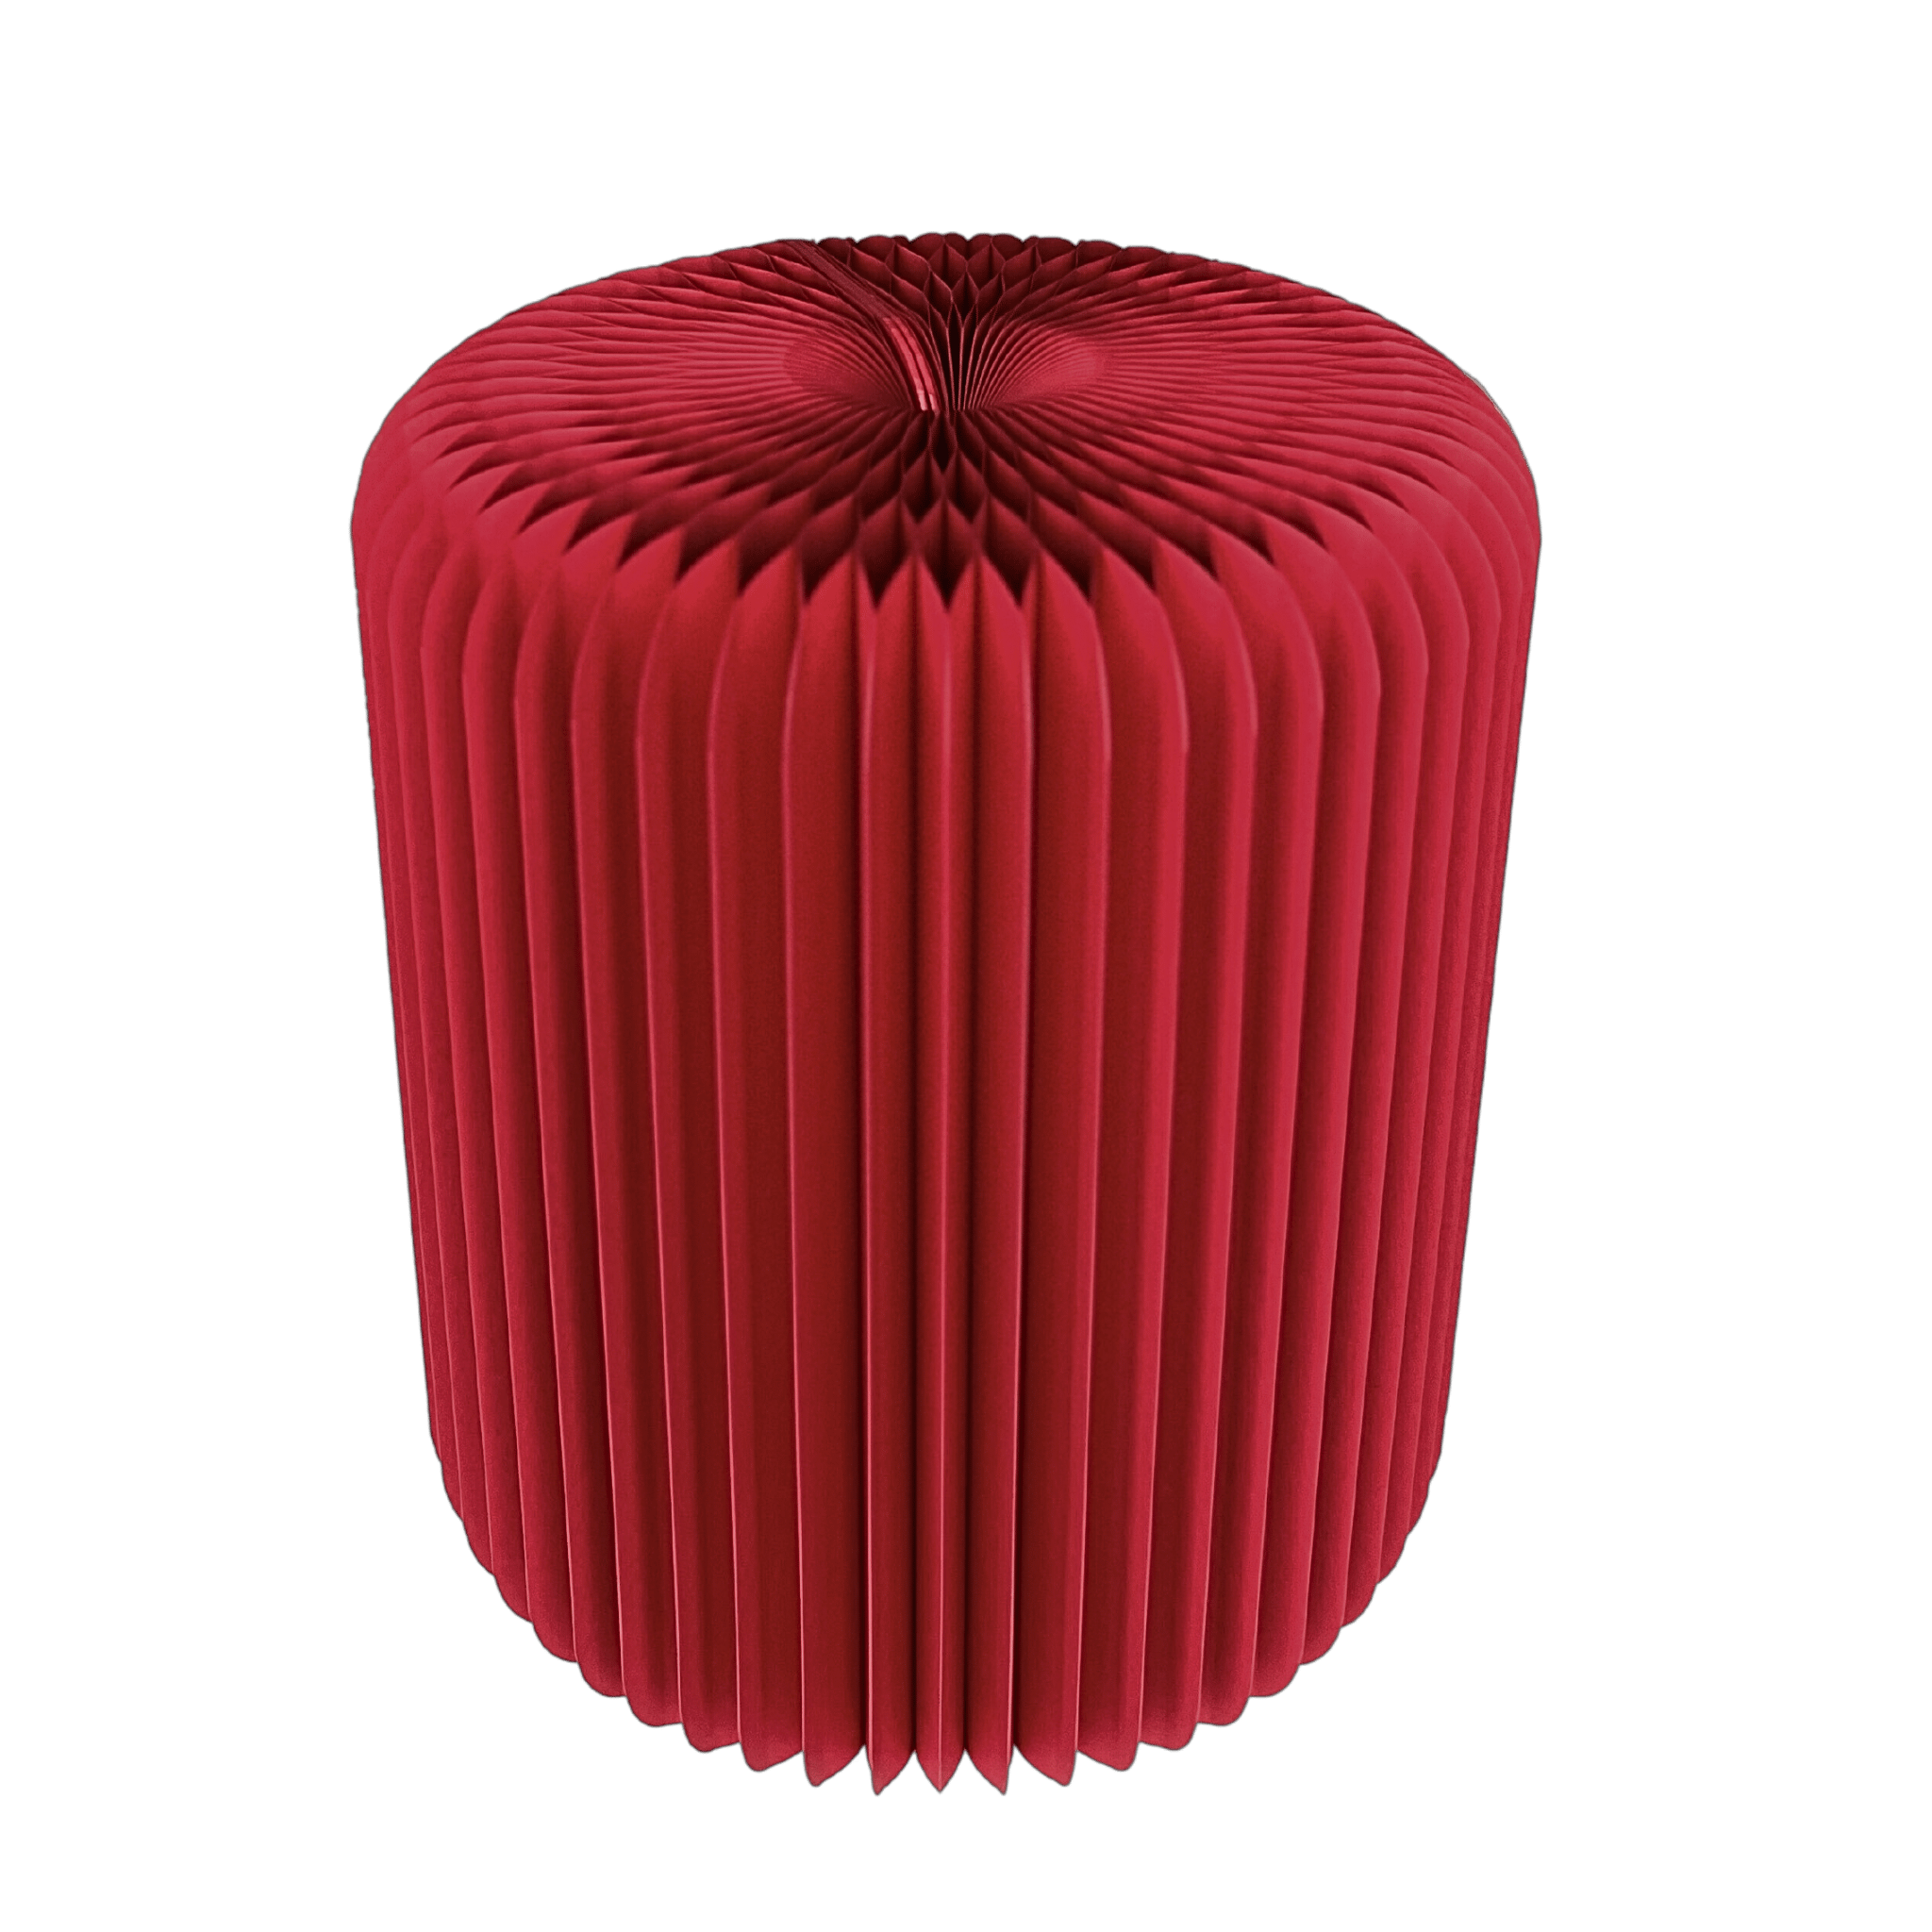 red unfolded round stool honeycomb design eco-friendly cardboard